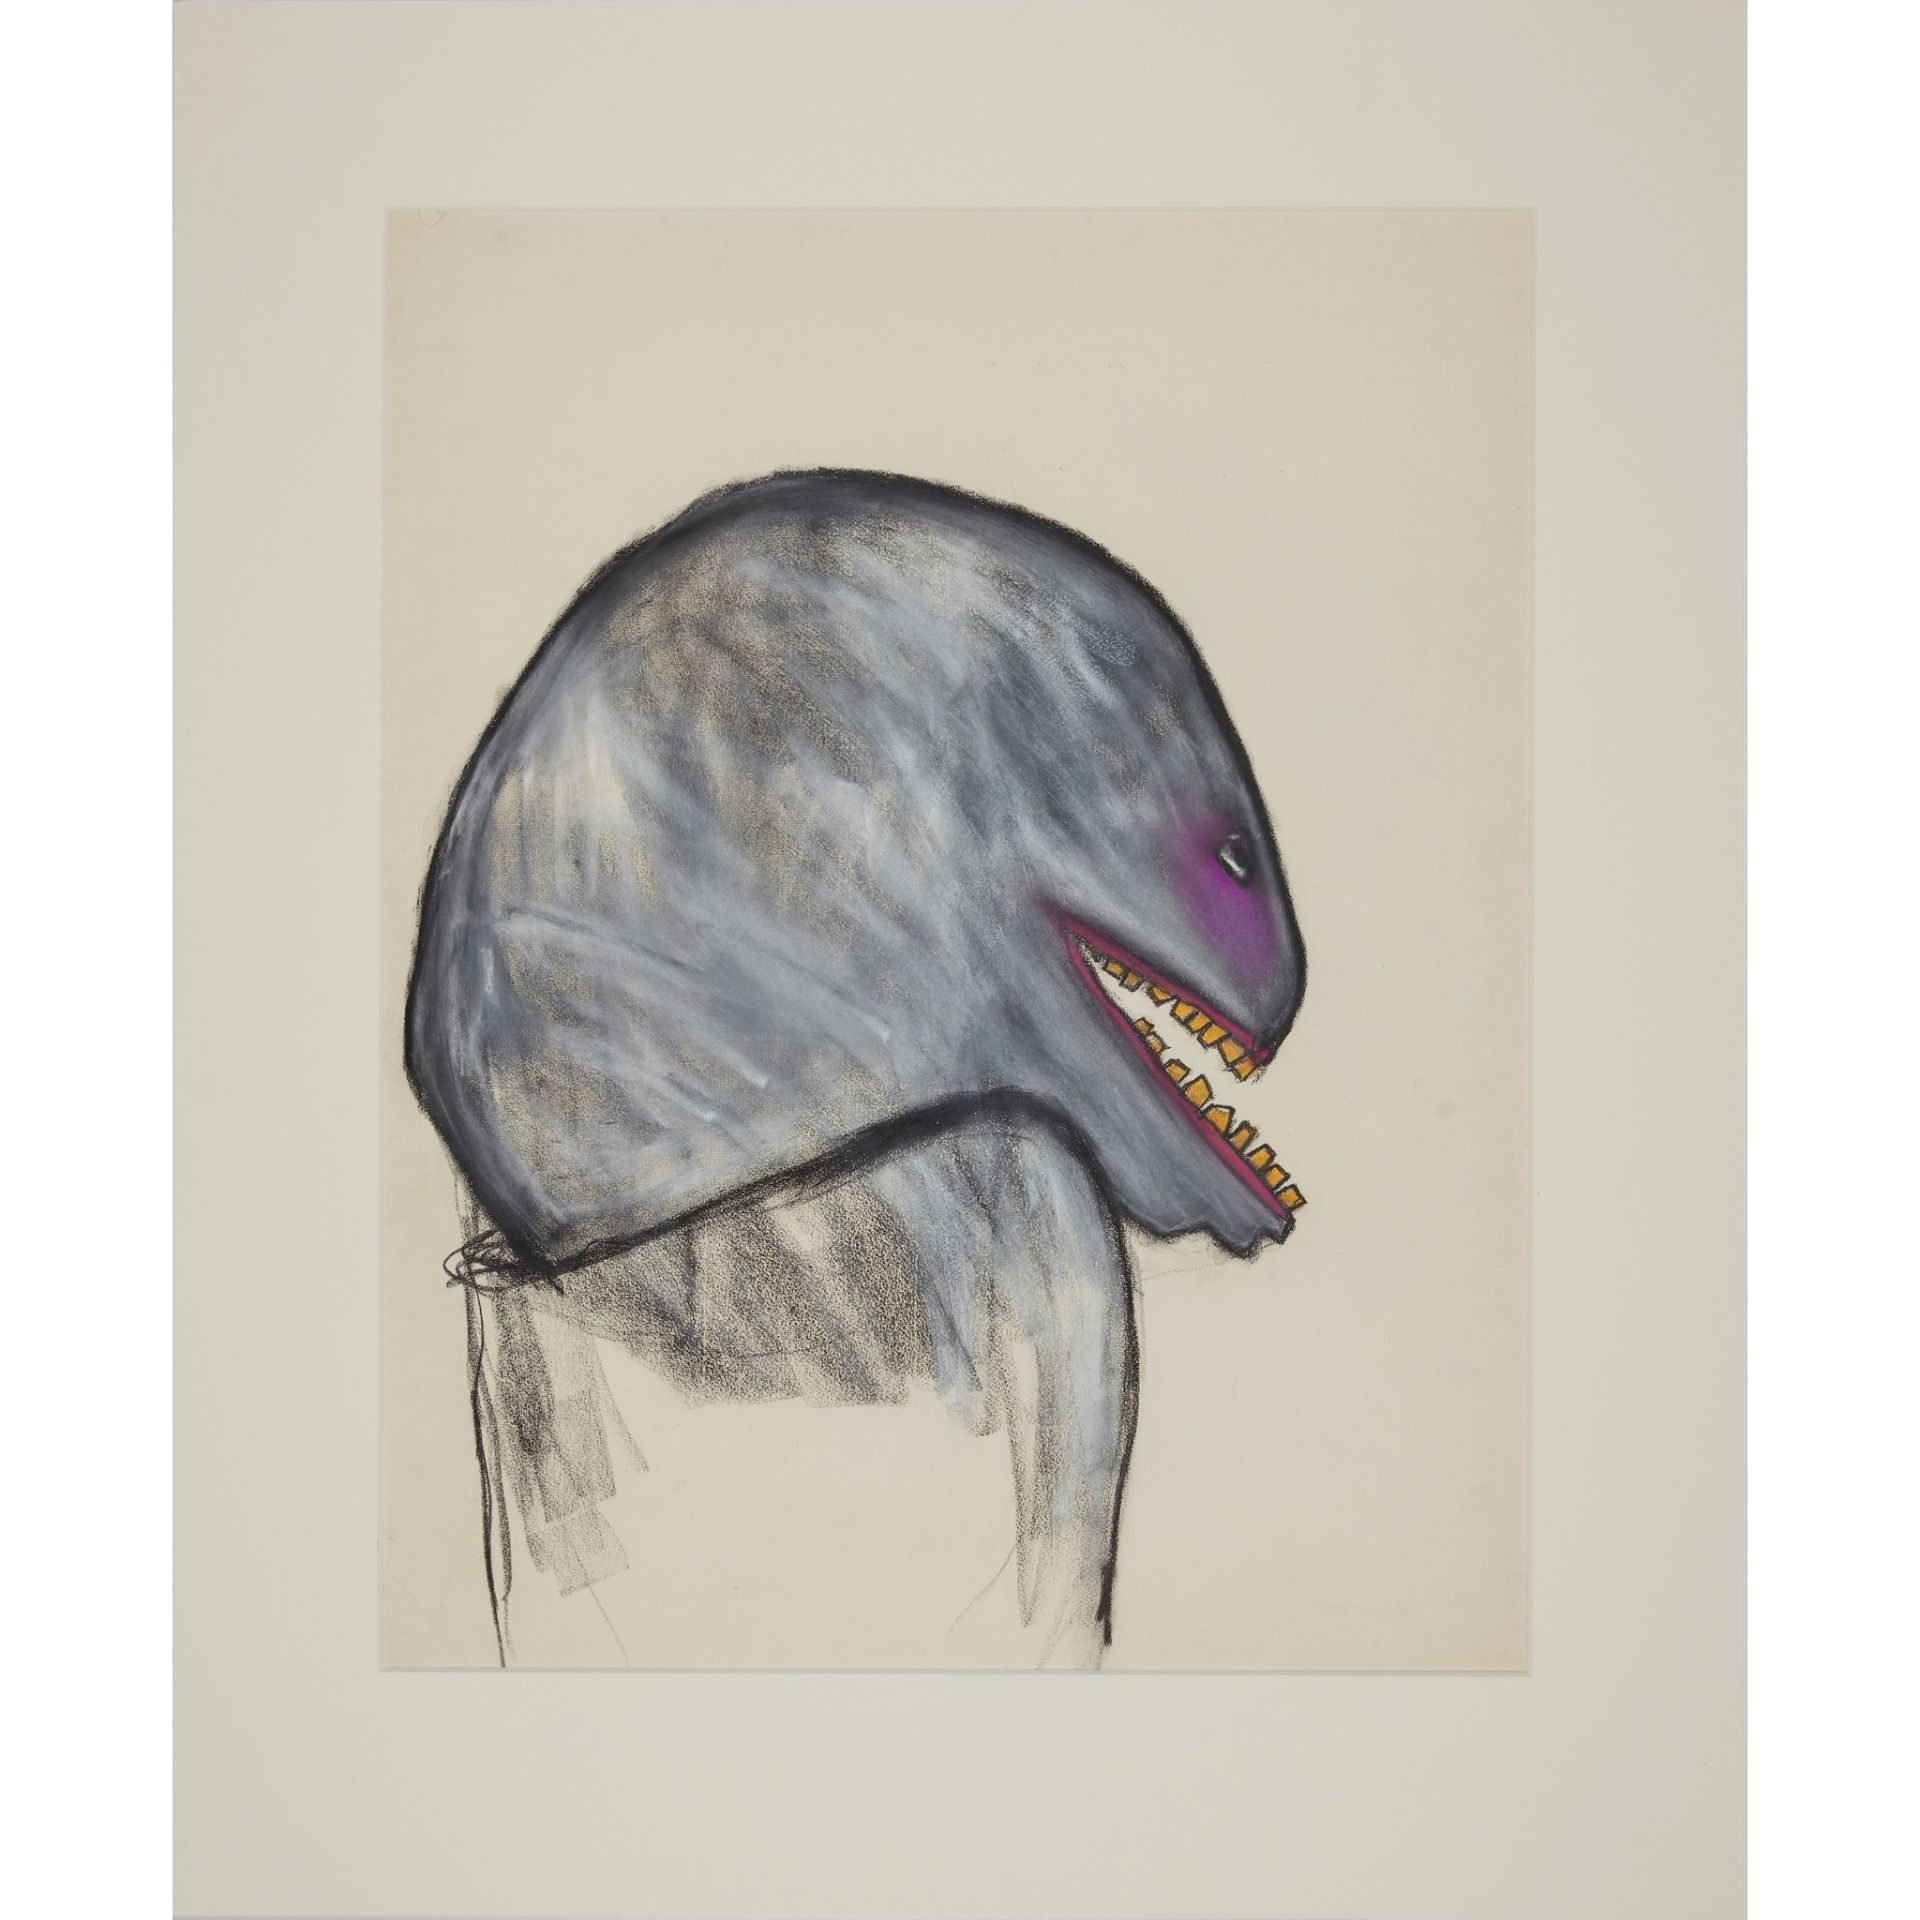 § PATRICIA DOUTHWAITE (SCOTTISH 1939-2002) UNTITLED (HEAD WITH YELLOW TEETH) - Image 2 of 2